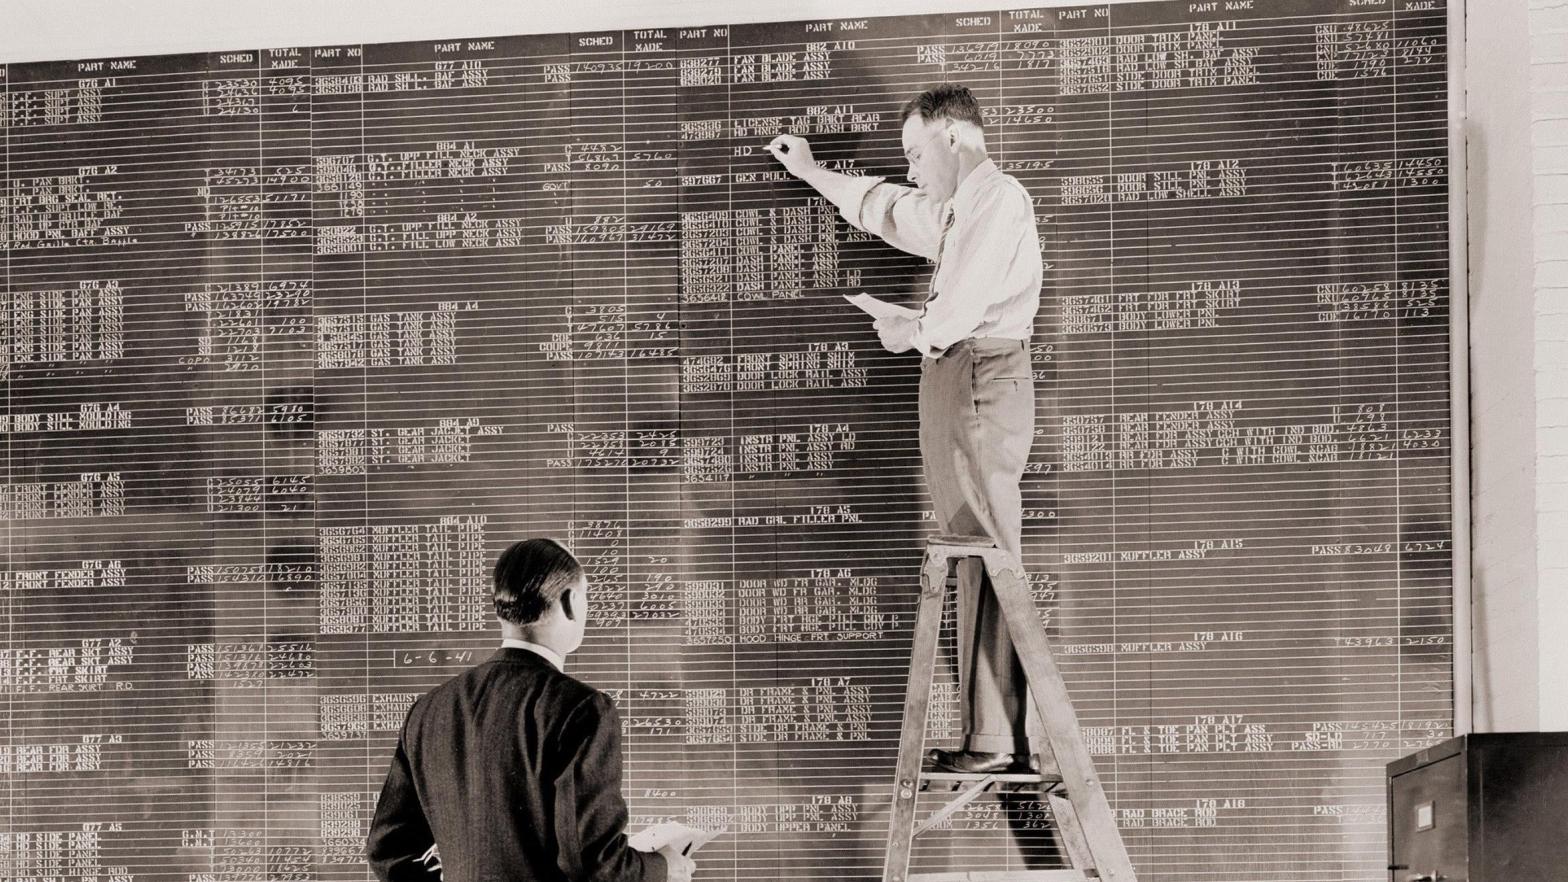 This is what passed for a spreadsheet in 1941. (Photo: Everett Collection, Shutterstock)